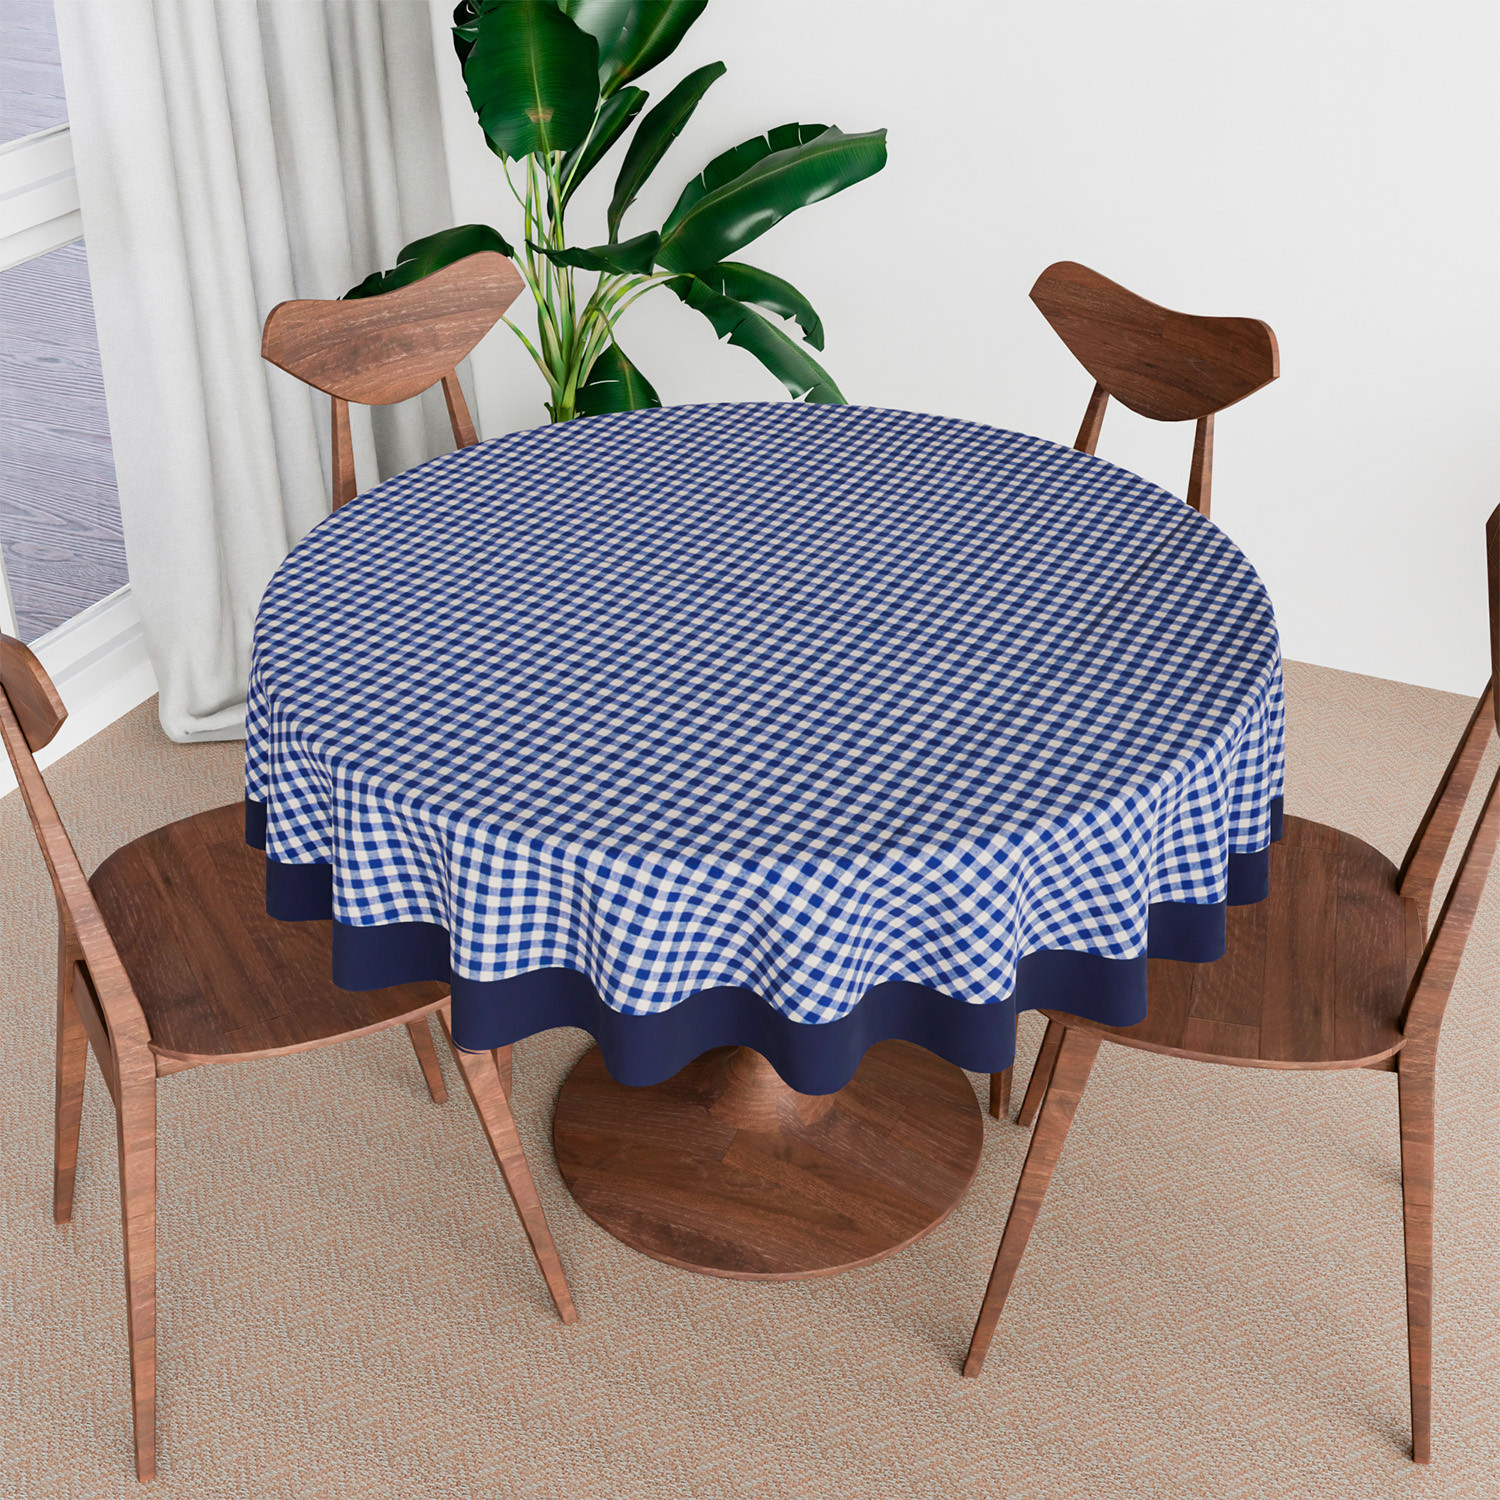 Kuber Industries Round Table Cover | Cotton Table Cloth for Round Tables | 4 Seater Round Table Cloth | Barik Check Kitchen Dining Tablecloth | Tabletop Cover | 60 Inch | Blue